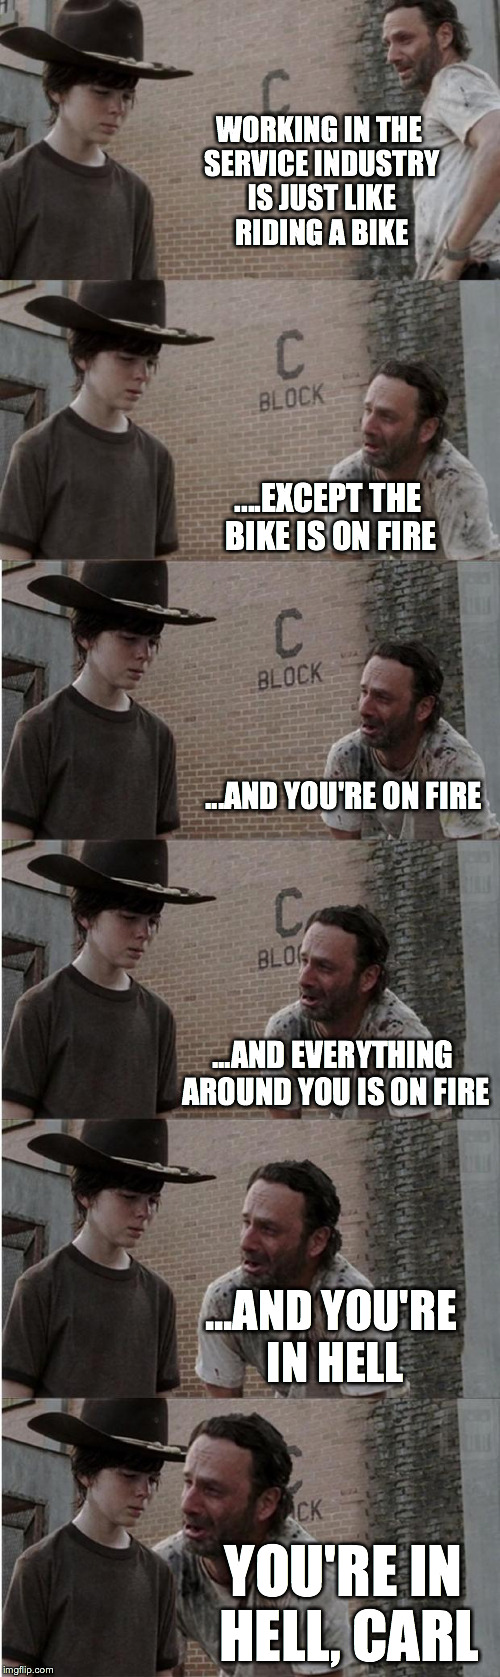 Rick and Carl Longer | WORKING IN THE SERVICE INDUSTRY IS JUST LIKE RIDING A BIKE ....EXCEPT THE BIKE IS ON FIRE ...AND YOU'RE ON FIRE ...AND EVERYTHING AROUND YOU | image tagged in memes,rick and carl longer,retail,work,service,customer service | made w/ Imgflip meme maker